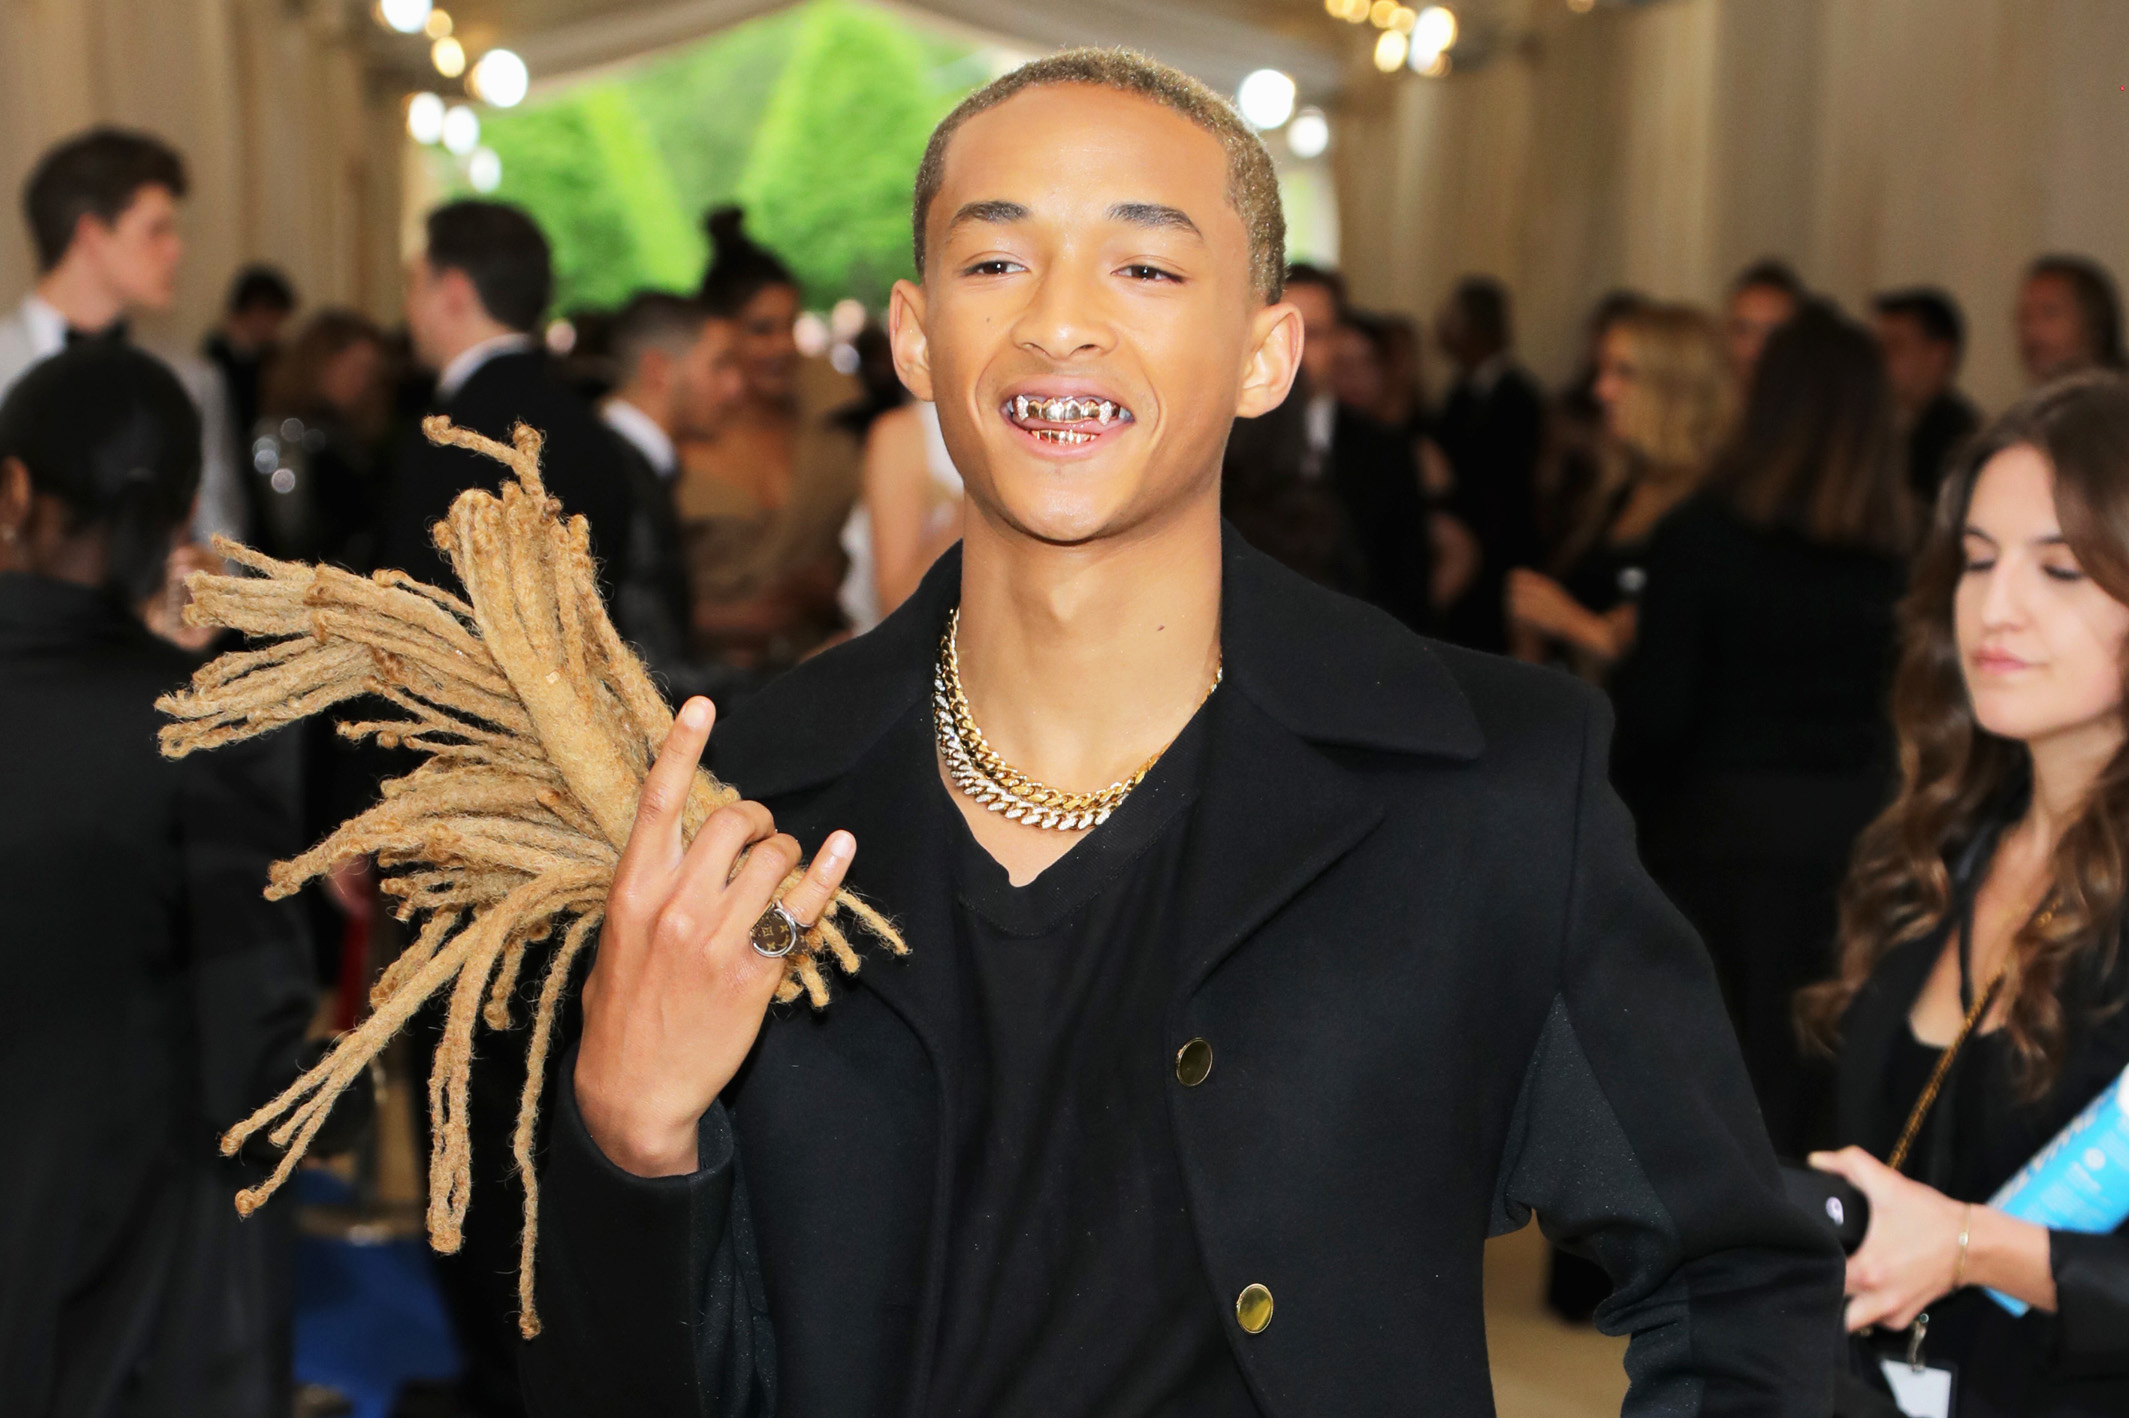 Jaden Smith attends the "Rei Kawakubo/Comme des Garcons: Art Of The In-Between" Costume Institute Gala at Metropolitan Museum of Art in New York City, on May 1, 2017. (Neilson Barnard—Getty Images)